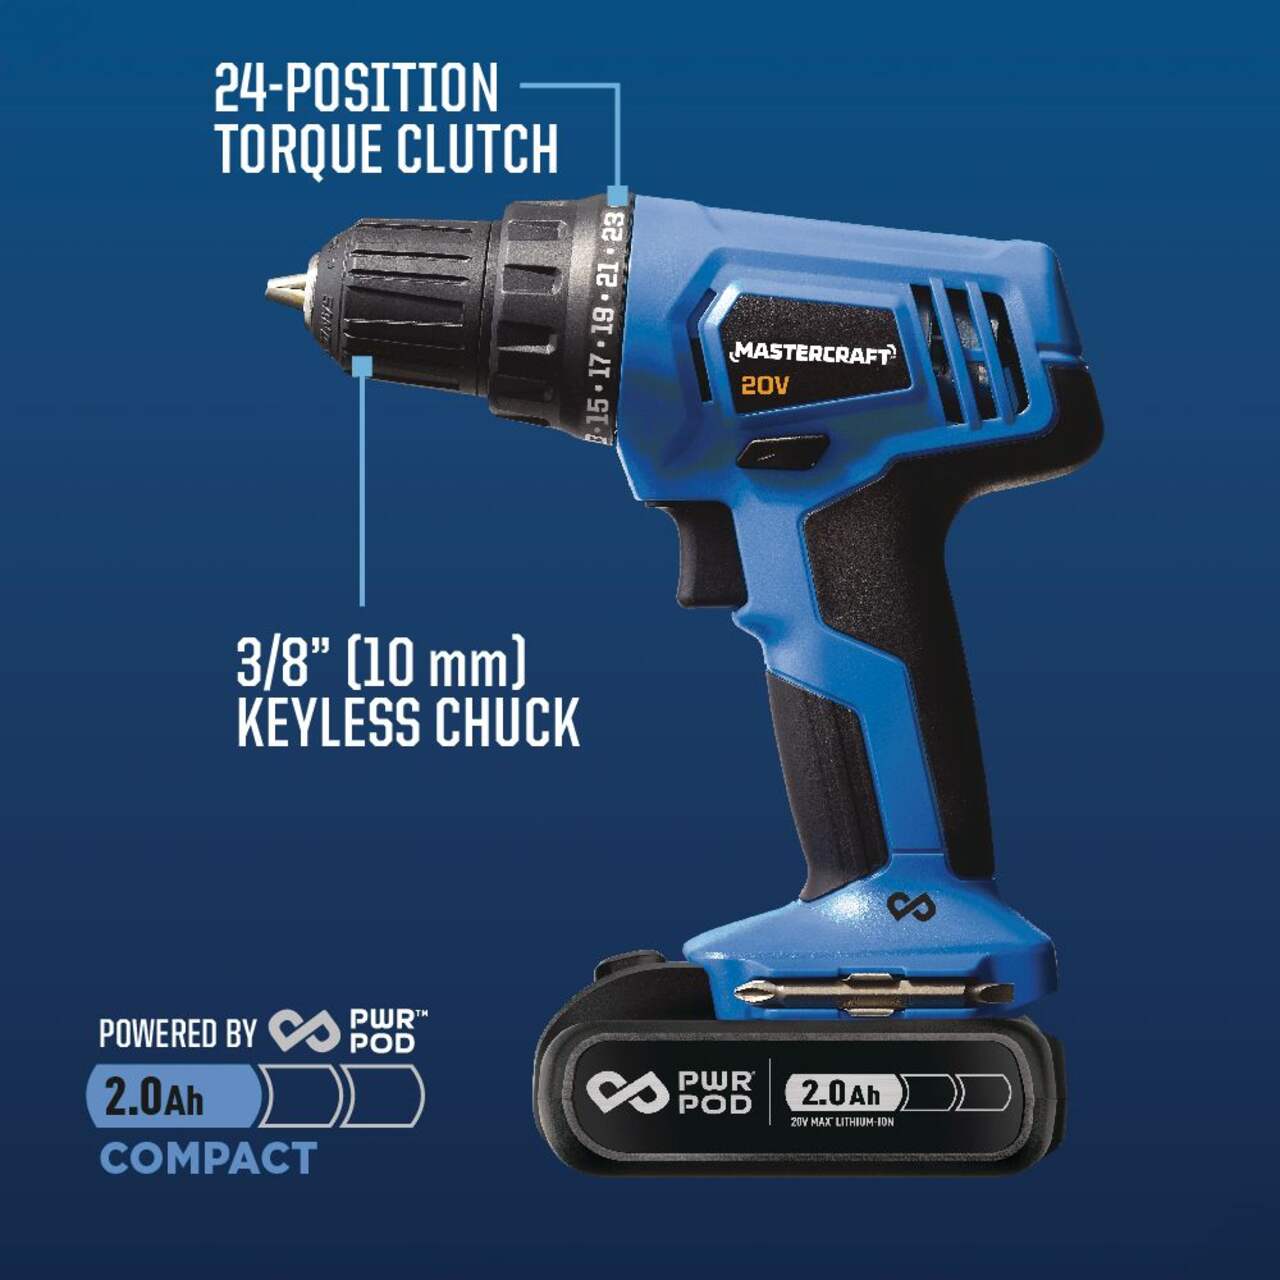 https://media-www.canadiantire.ca/product/fixing/tools/portable-power-tools/0541332/mastercraft-20v-1-speed-drill-90c19169-f574-4bcc-b418-e7501396d261-jpgrendition.jpg?imdensity=1&imwidth=1244&impolicy=mZoom